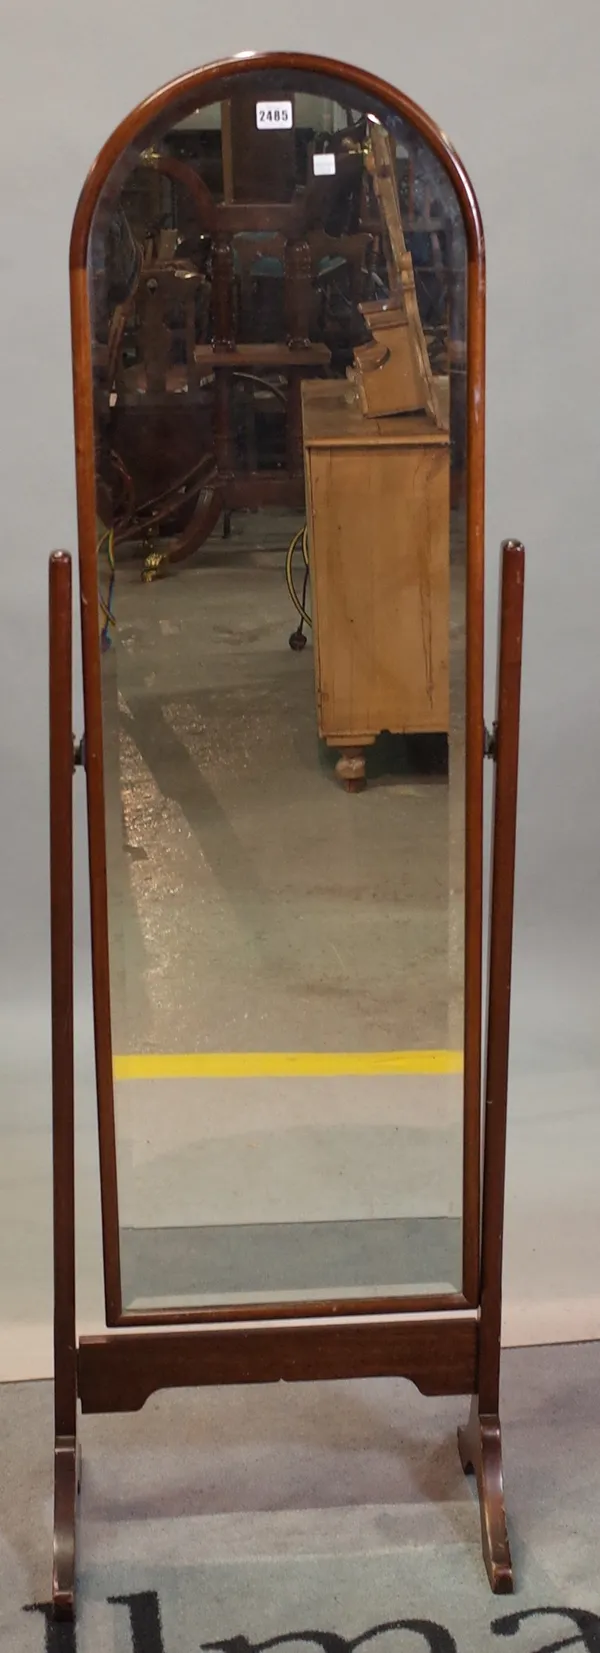 An early 20th century mahogany arch top cheval mirror with bevelled glass, 45cm wide x 140cm high.